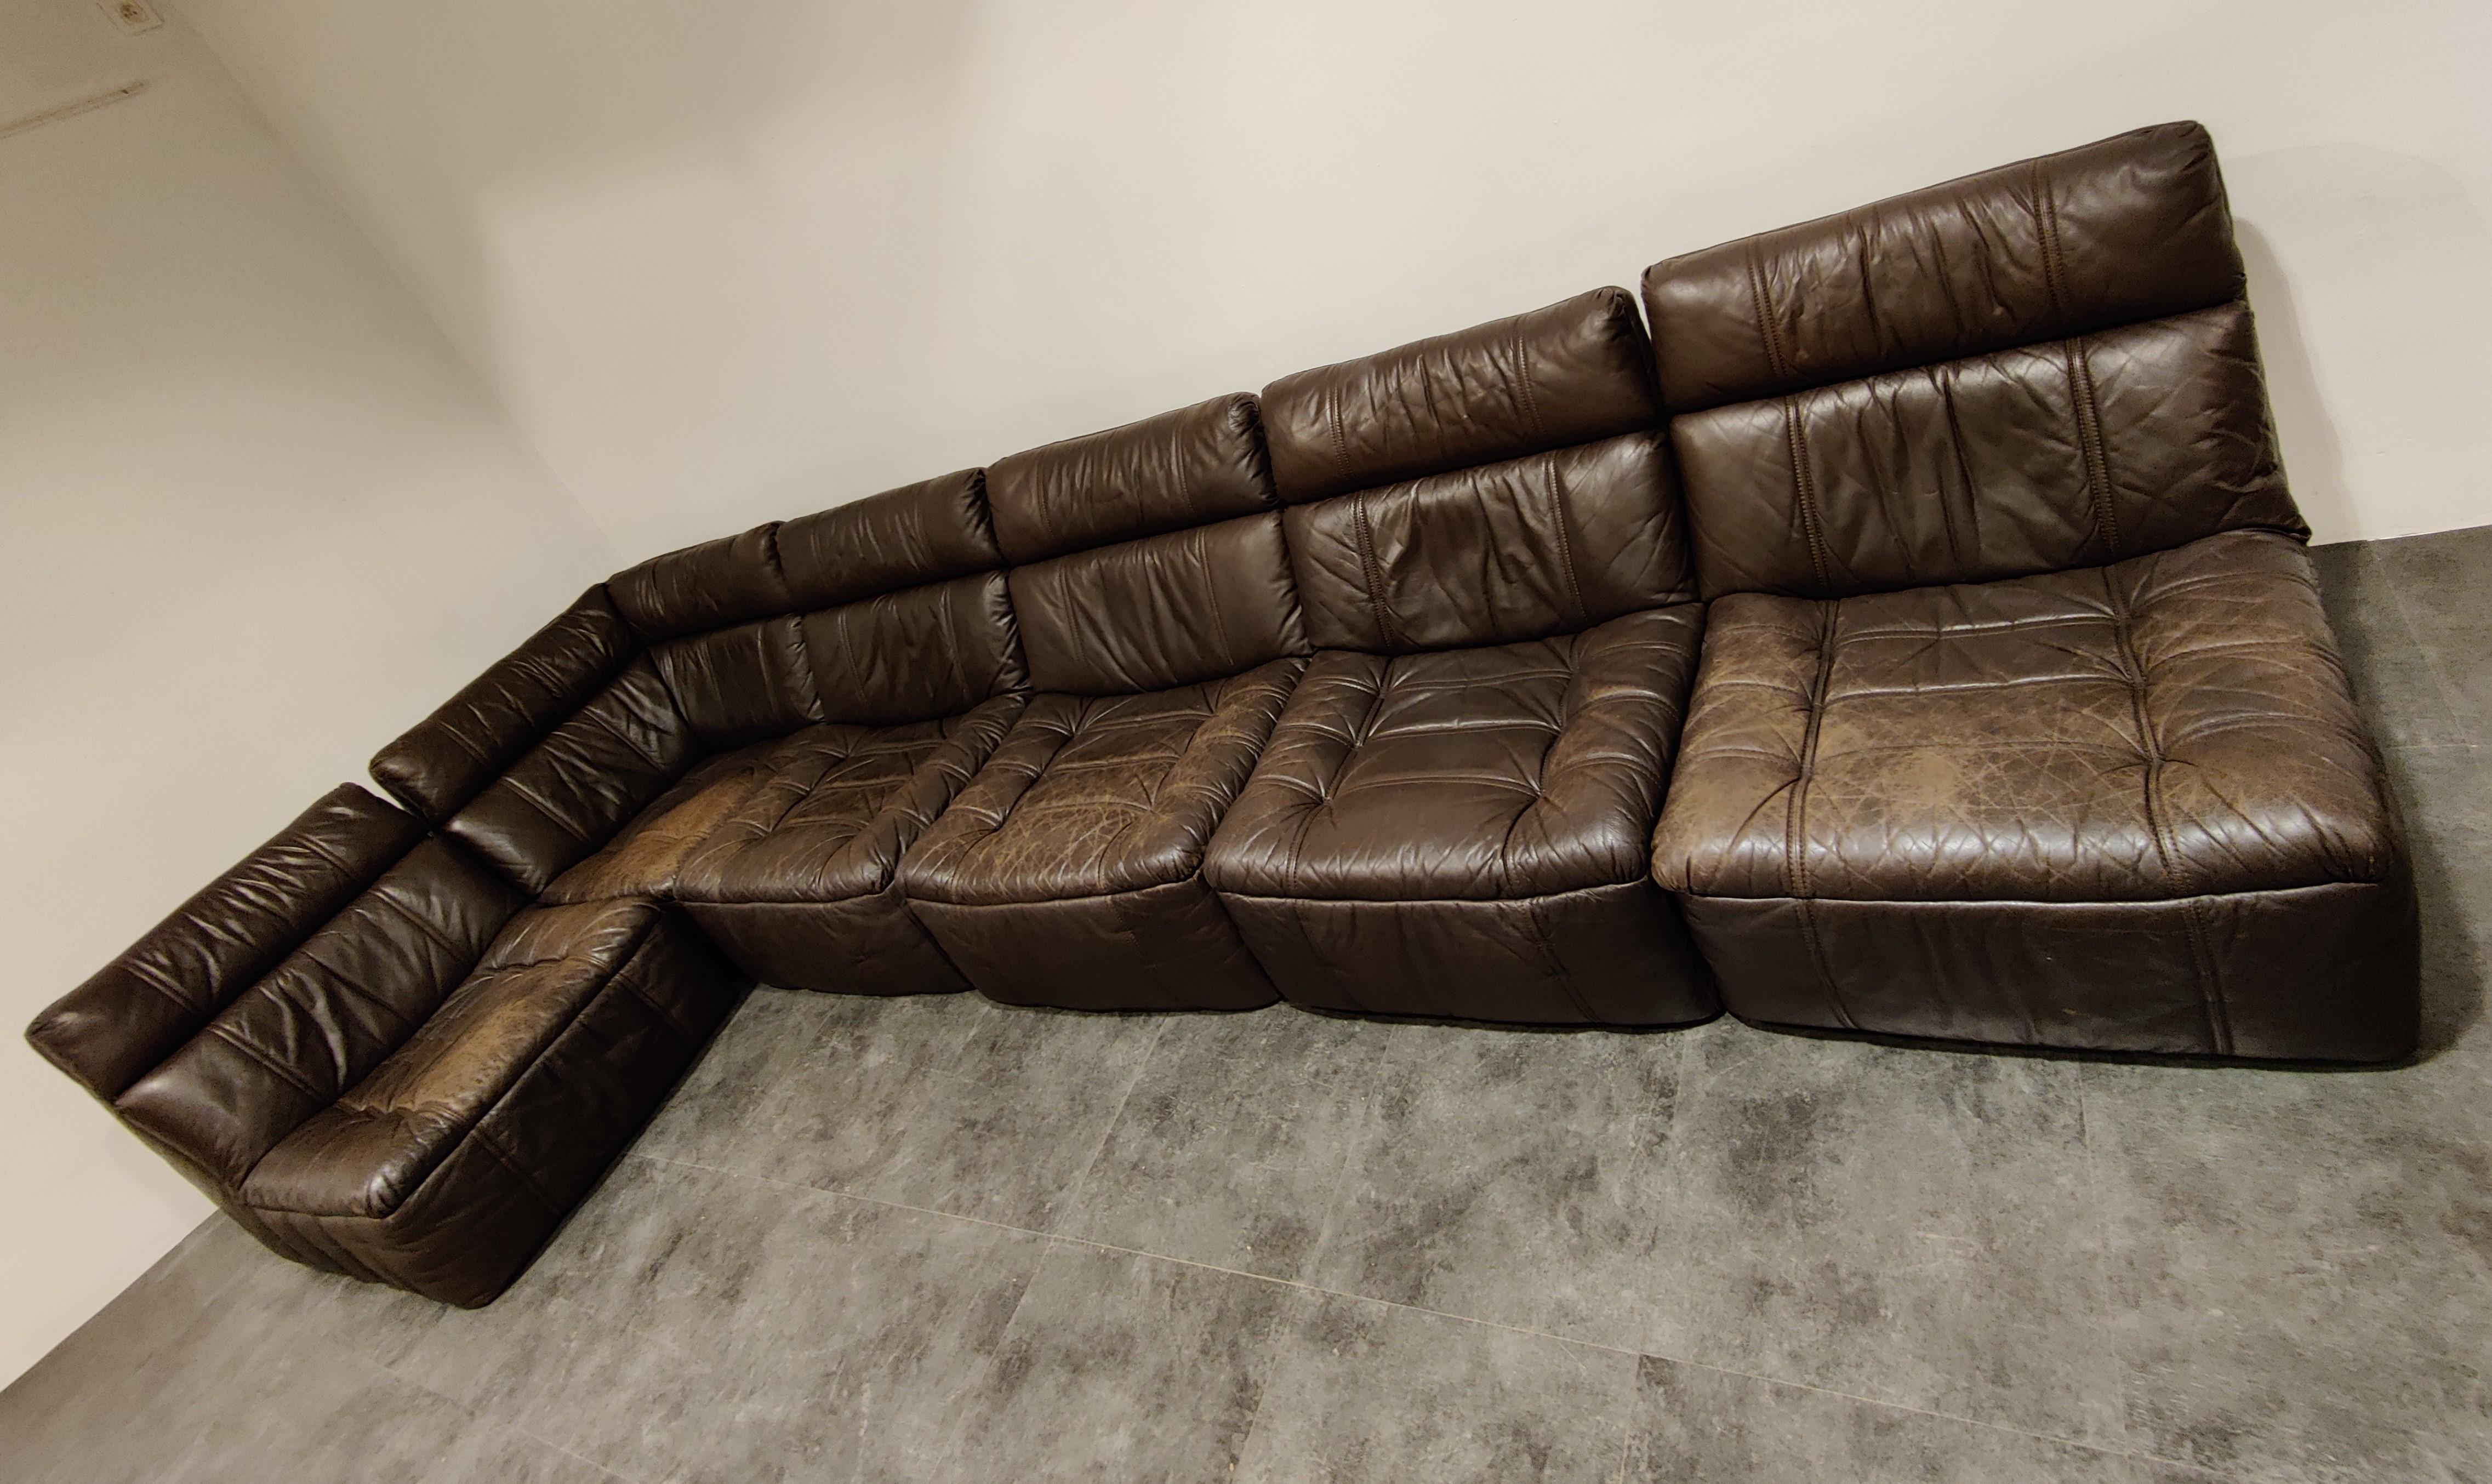 Modular brown leather sofa by Rolf Benz.

The set consists of 6 pieces.

The sofa is in good used condition, no tears, no holes and a lovely patina.

1970s, Germany

Dimensions:

Dimensions of a regular element:
Height 75cm/29.52